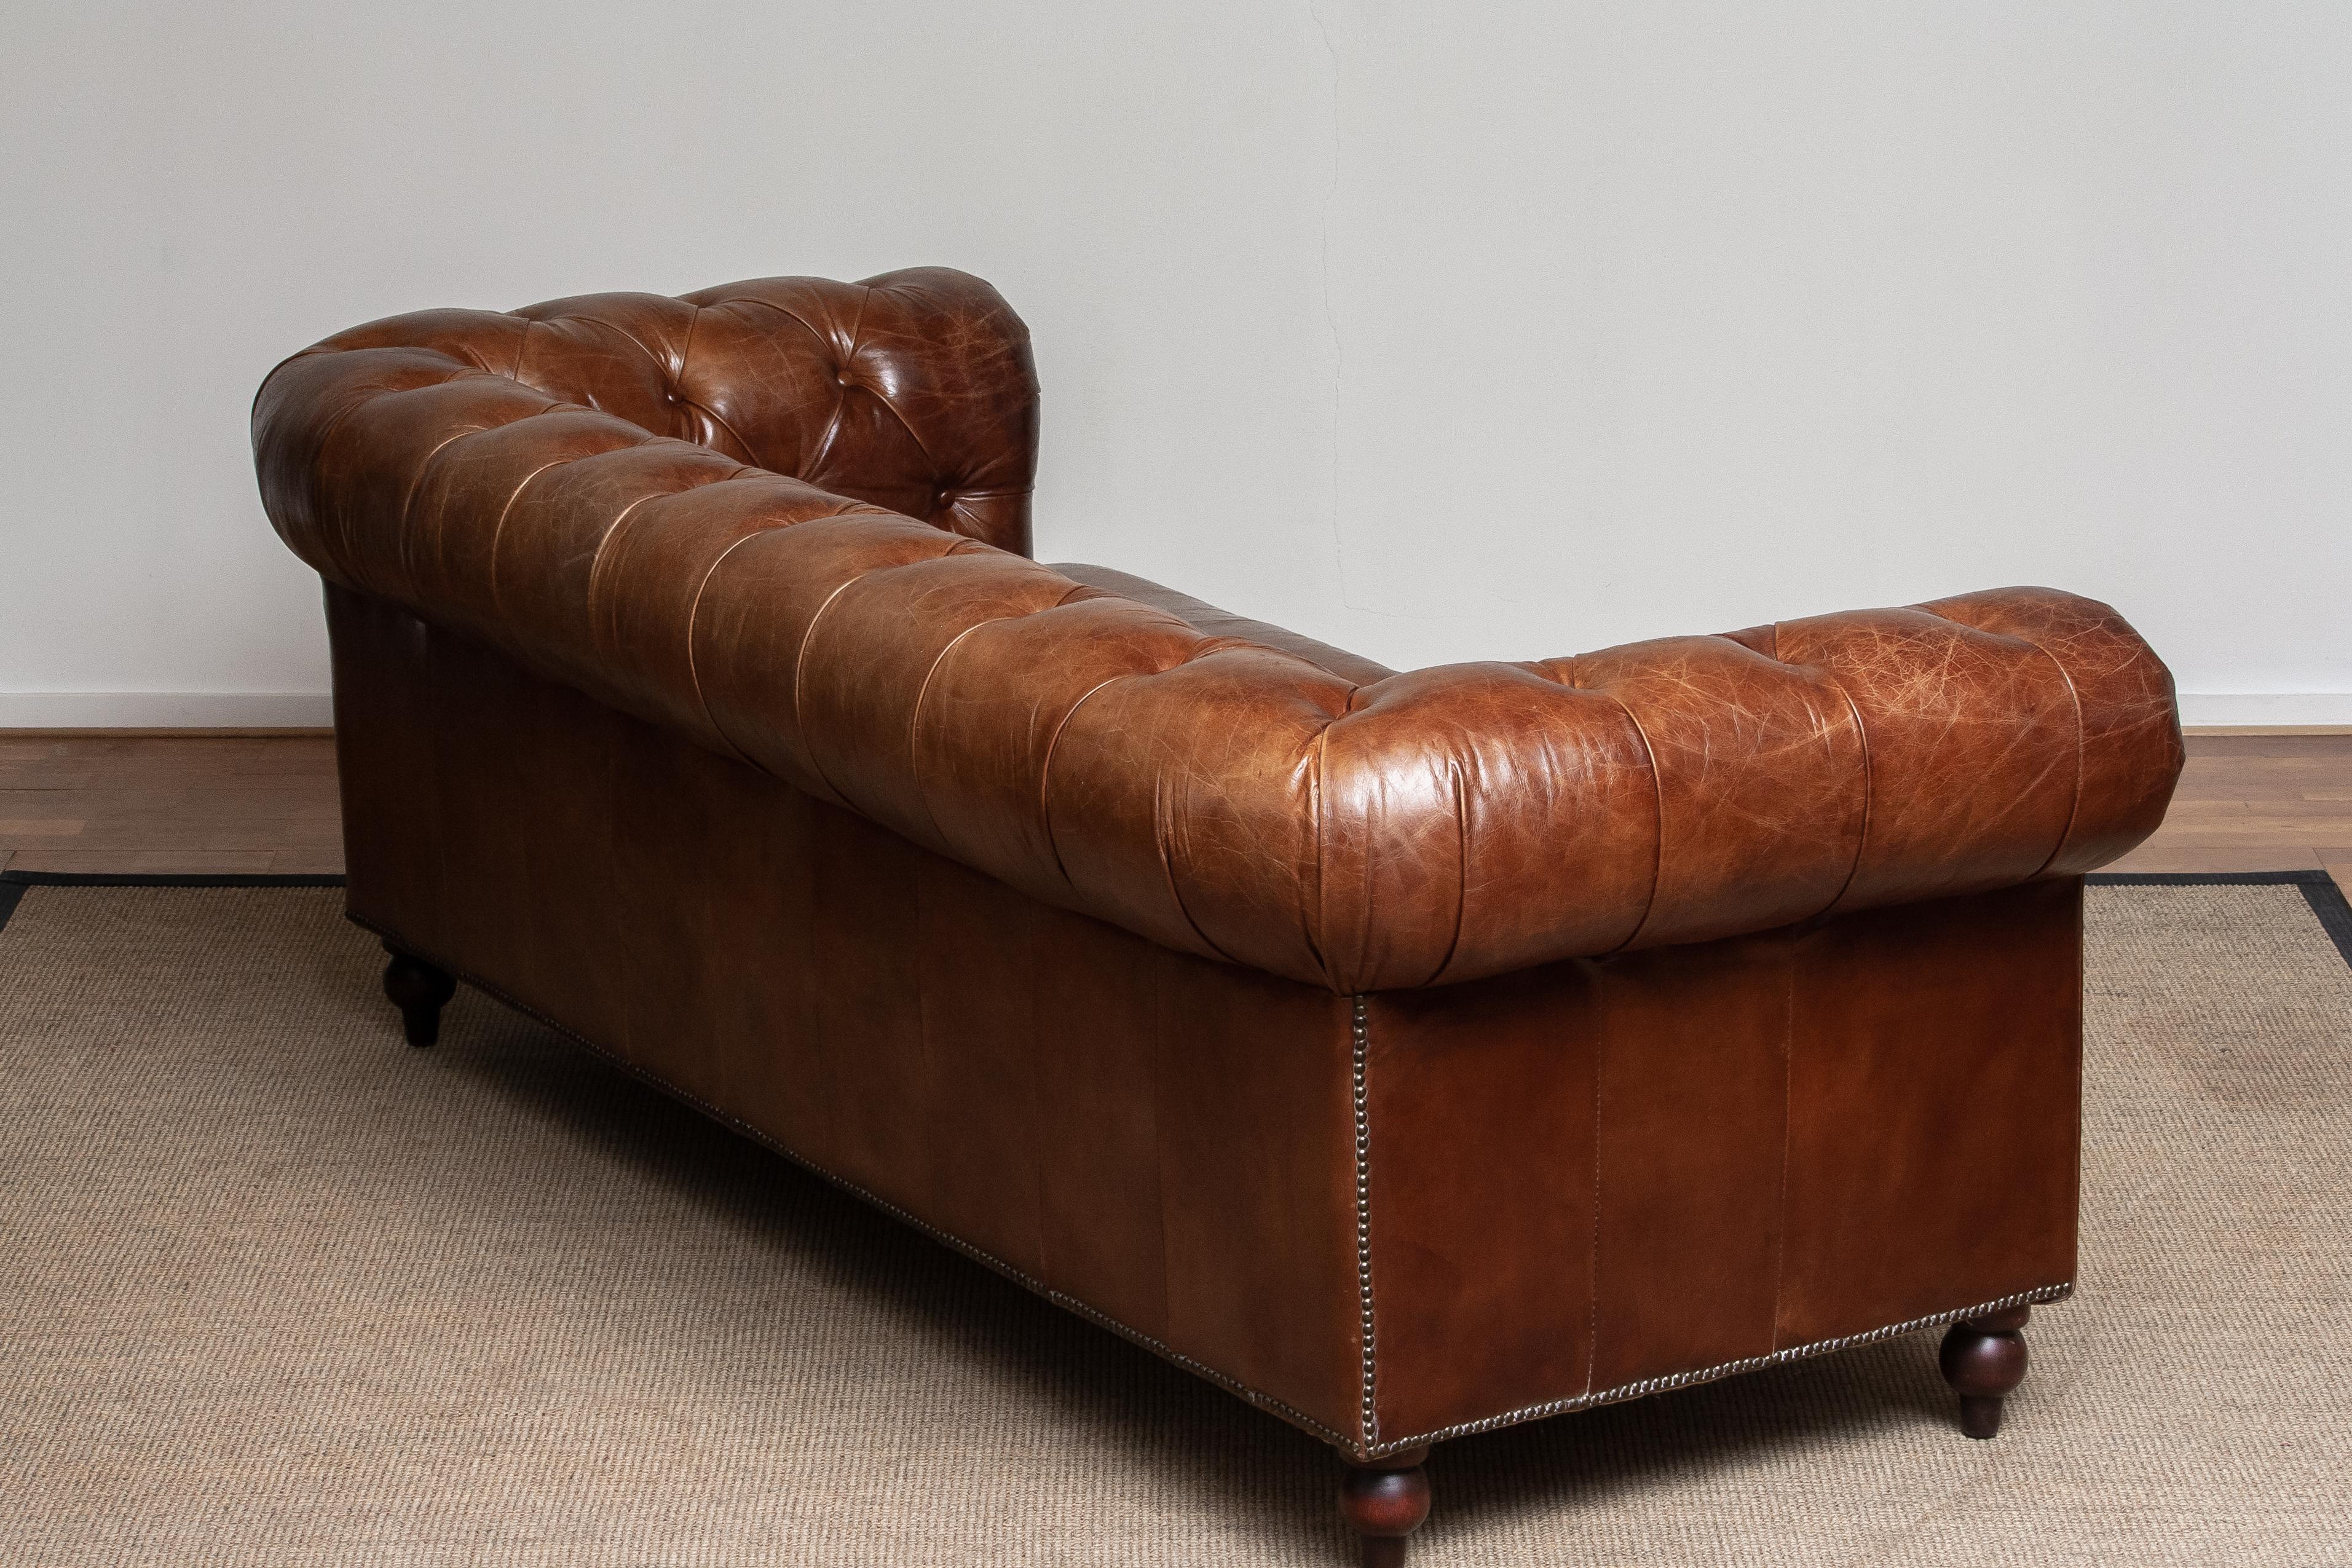 Tufted Brown Leather English Chesterfield Sofa from the 20th Century 8